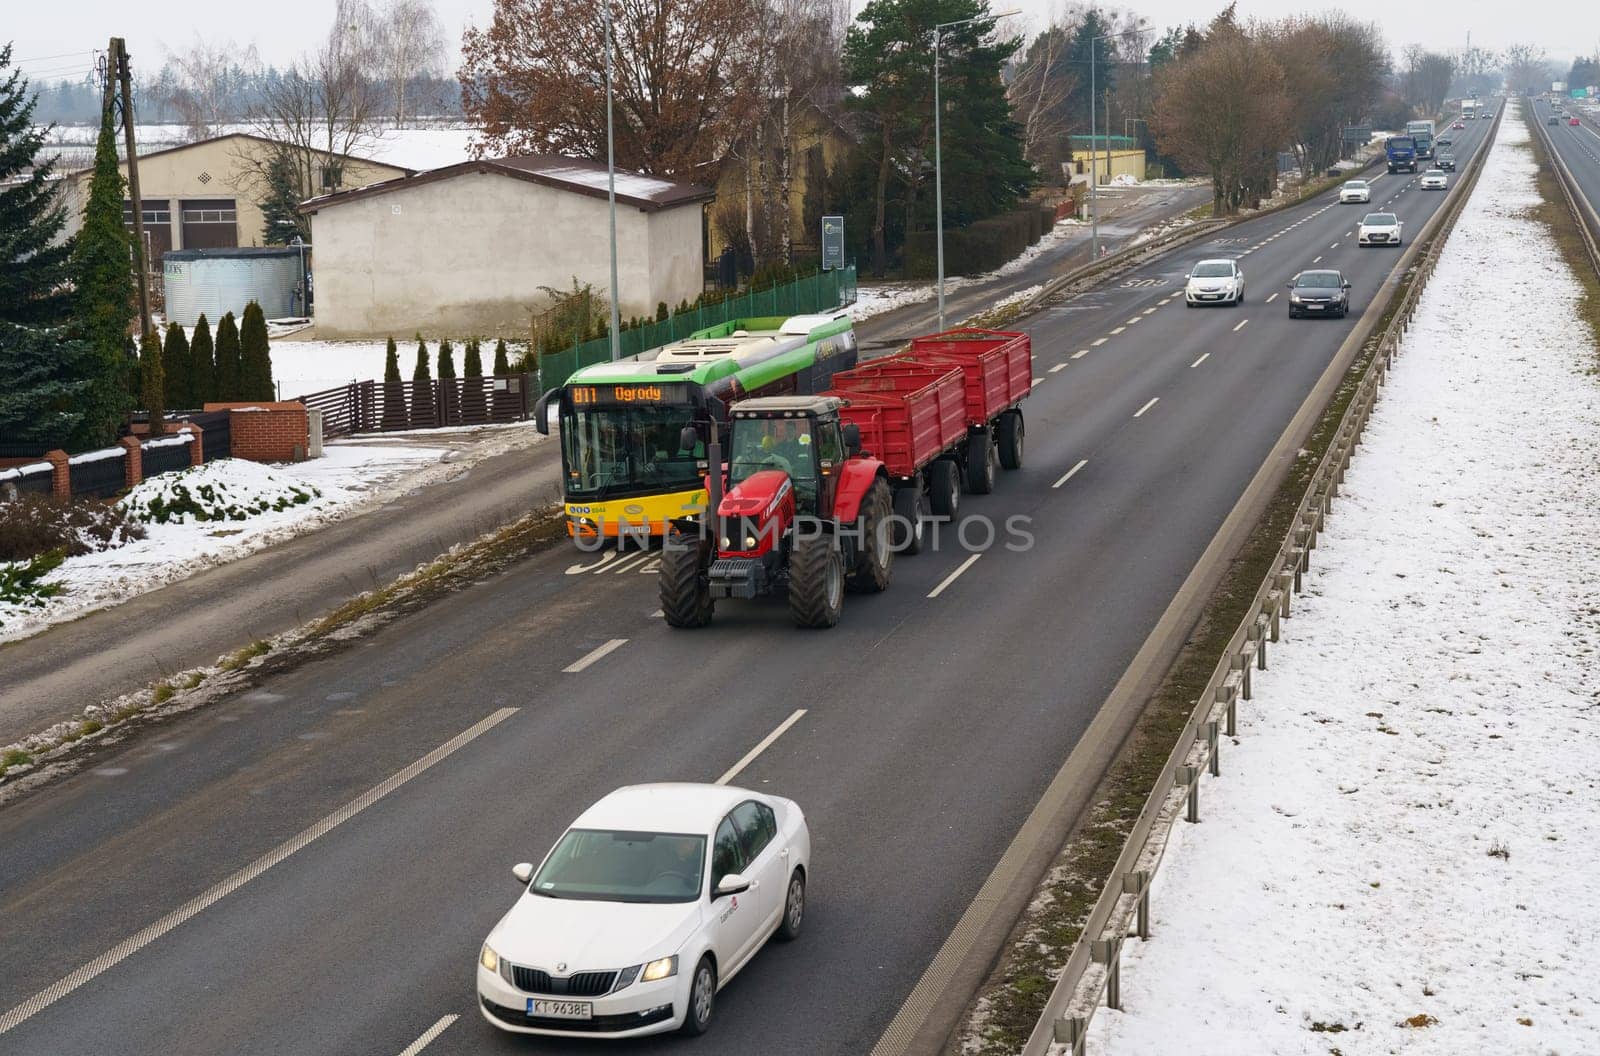 Poznan, Poland - January 24, 2023: Car traffic on a motorway in Poland. A bus and a tractor are driving in the foreground.